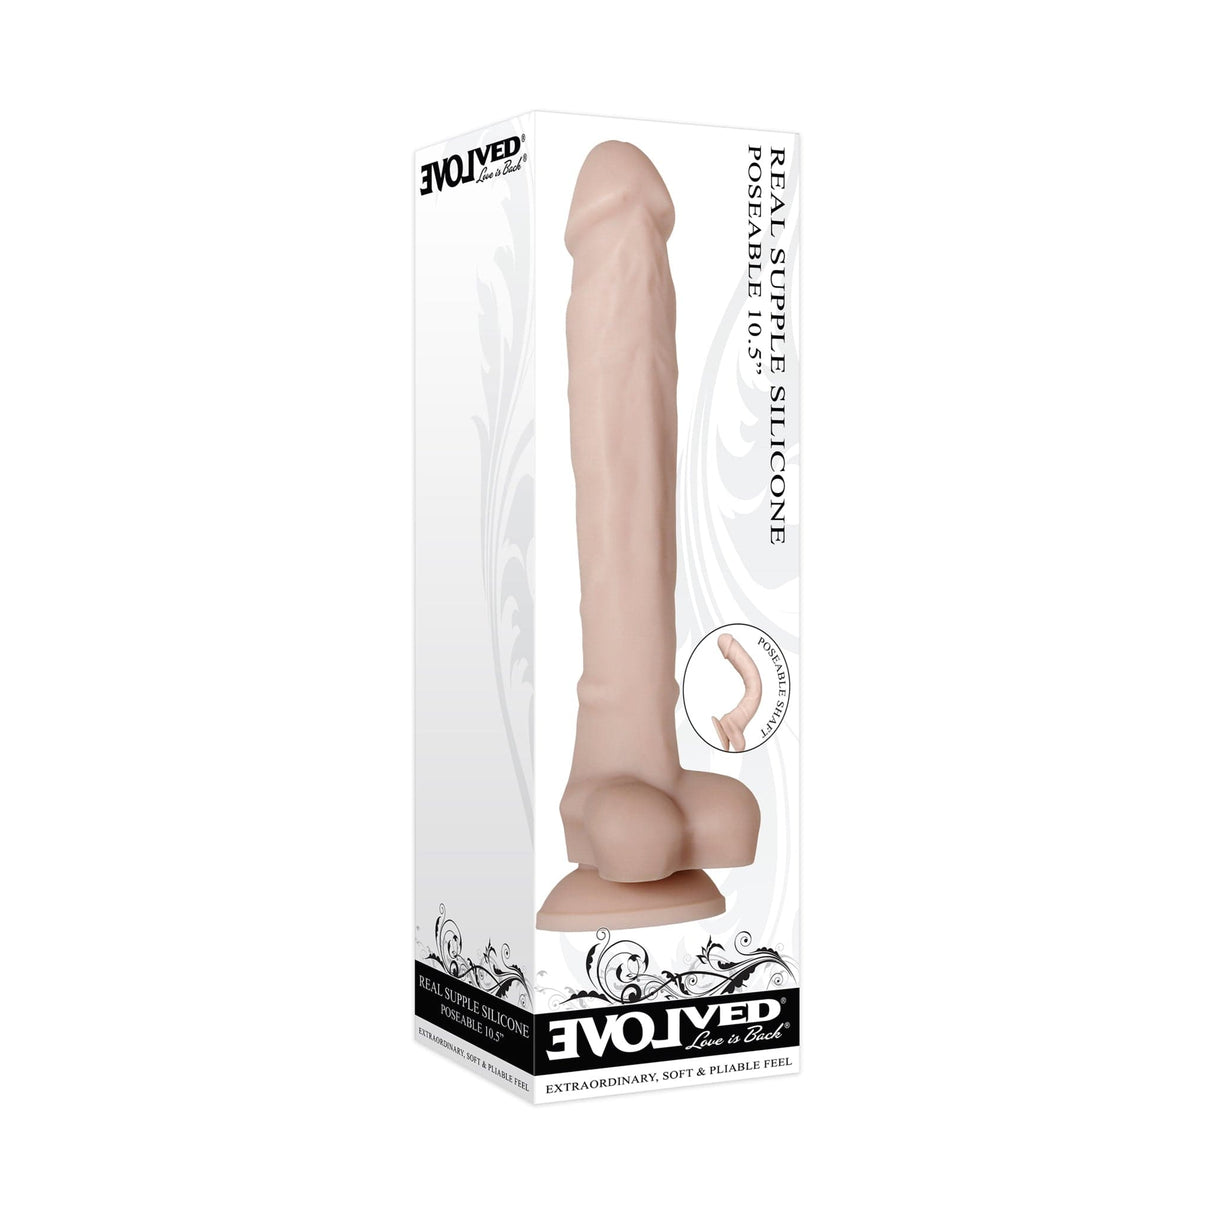 Evolved - Real Supple Silicone Posable Realistic Dildo  Beige 844477015903 Realistic Dildo with suction cup (Non Vibration)